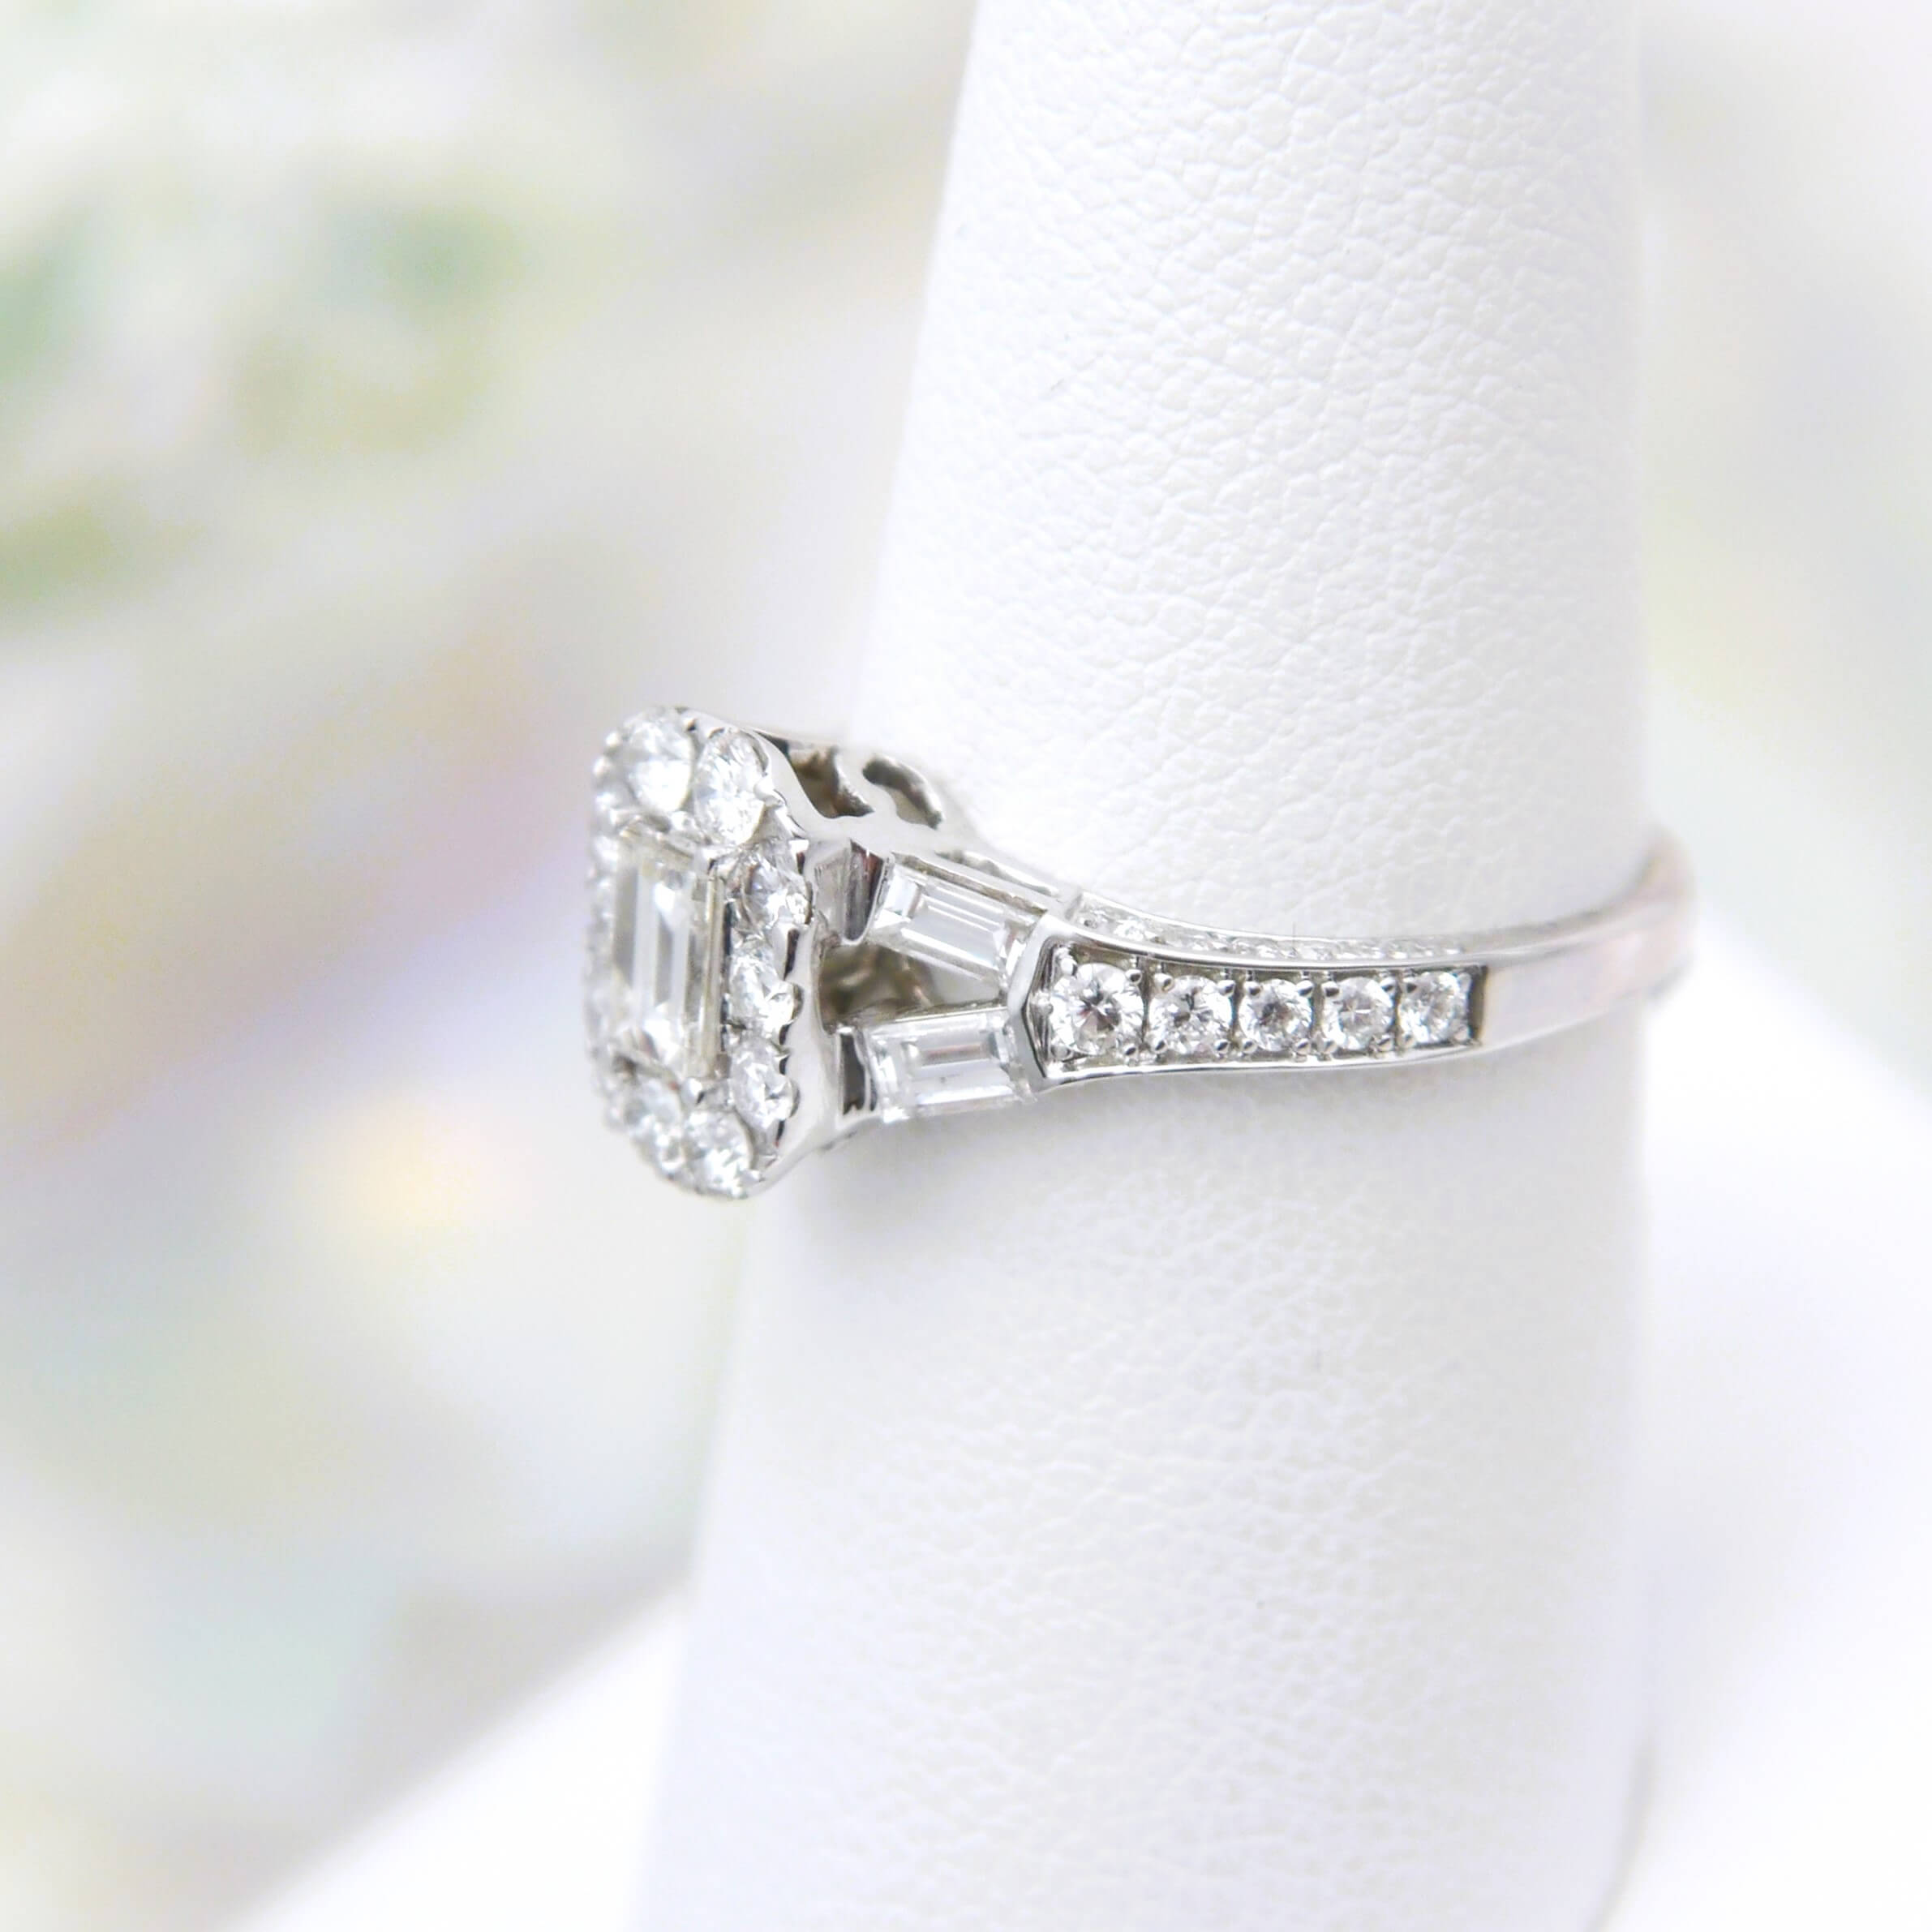 18k (1.44 ct) Emerald Cut Diamond and Diamond Halo Engagement Ring in White Gold